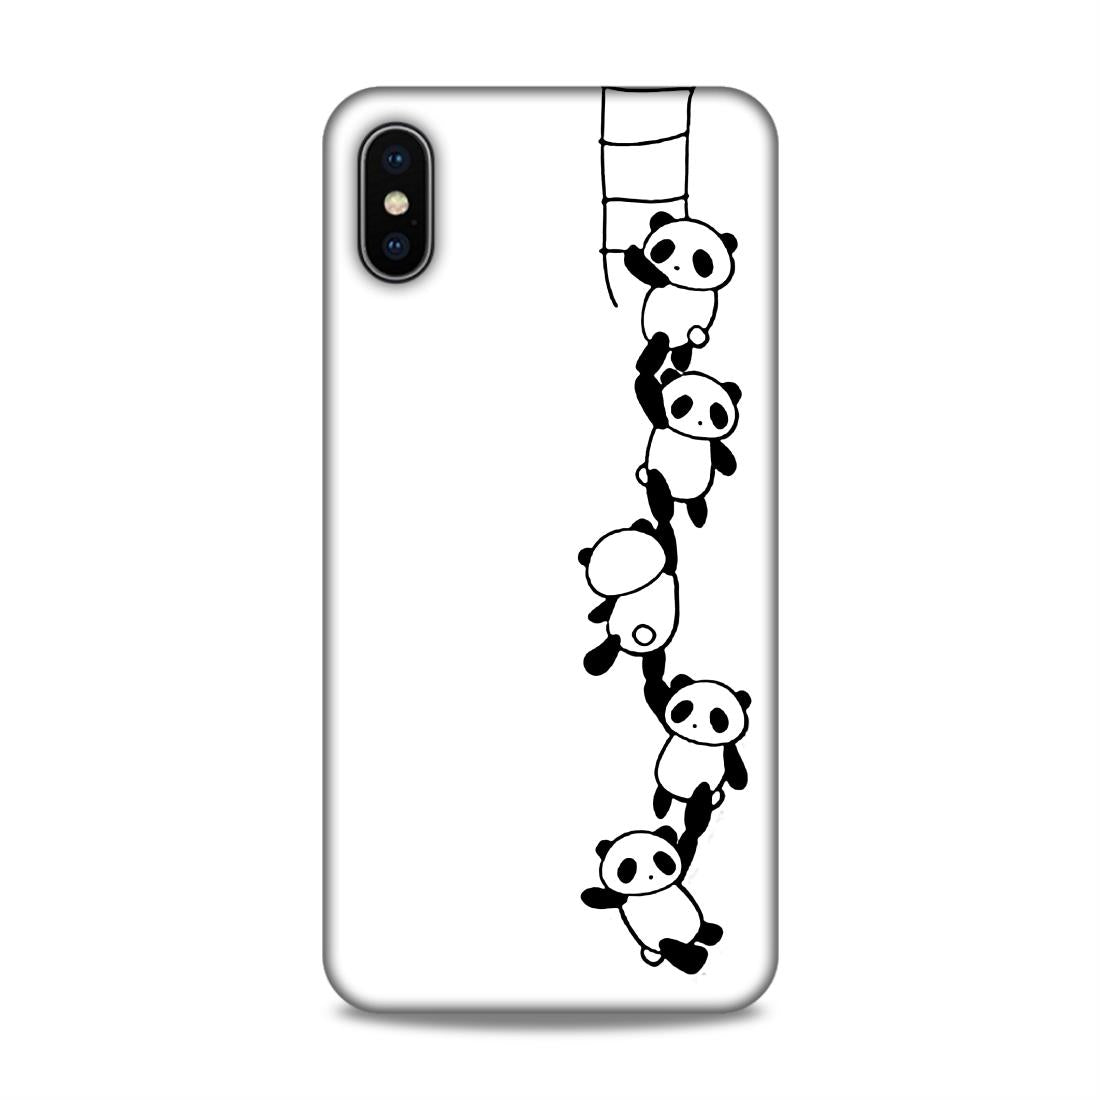 Panda Hard Back Case For Apple iPhone XS Max